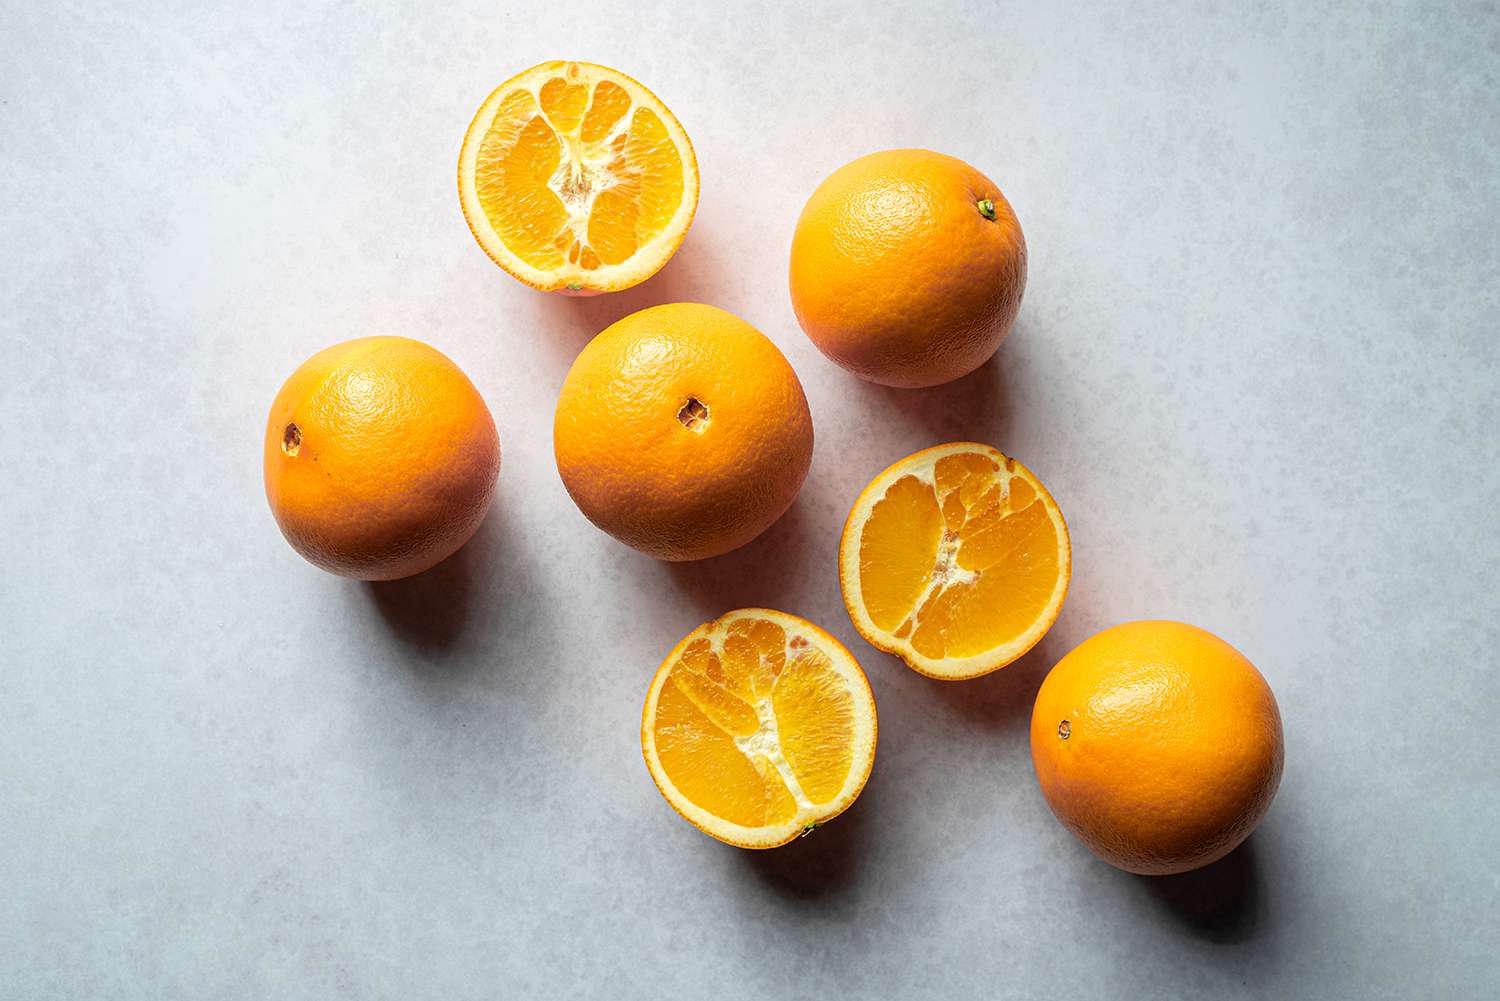 How To Store Navel Oranges